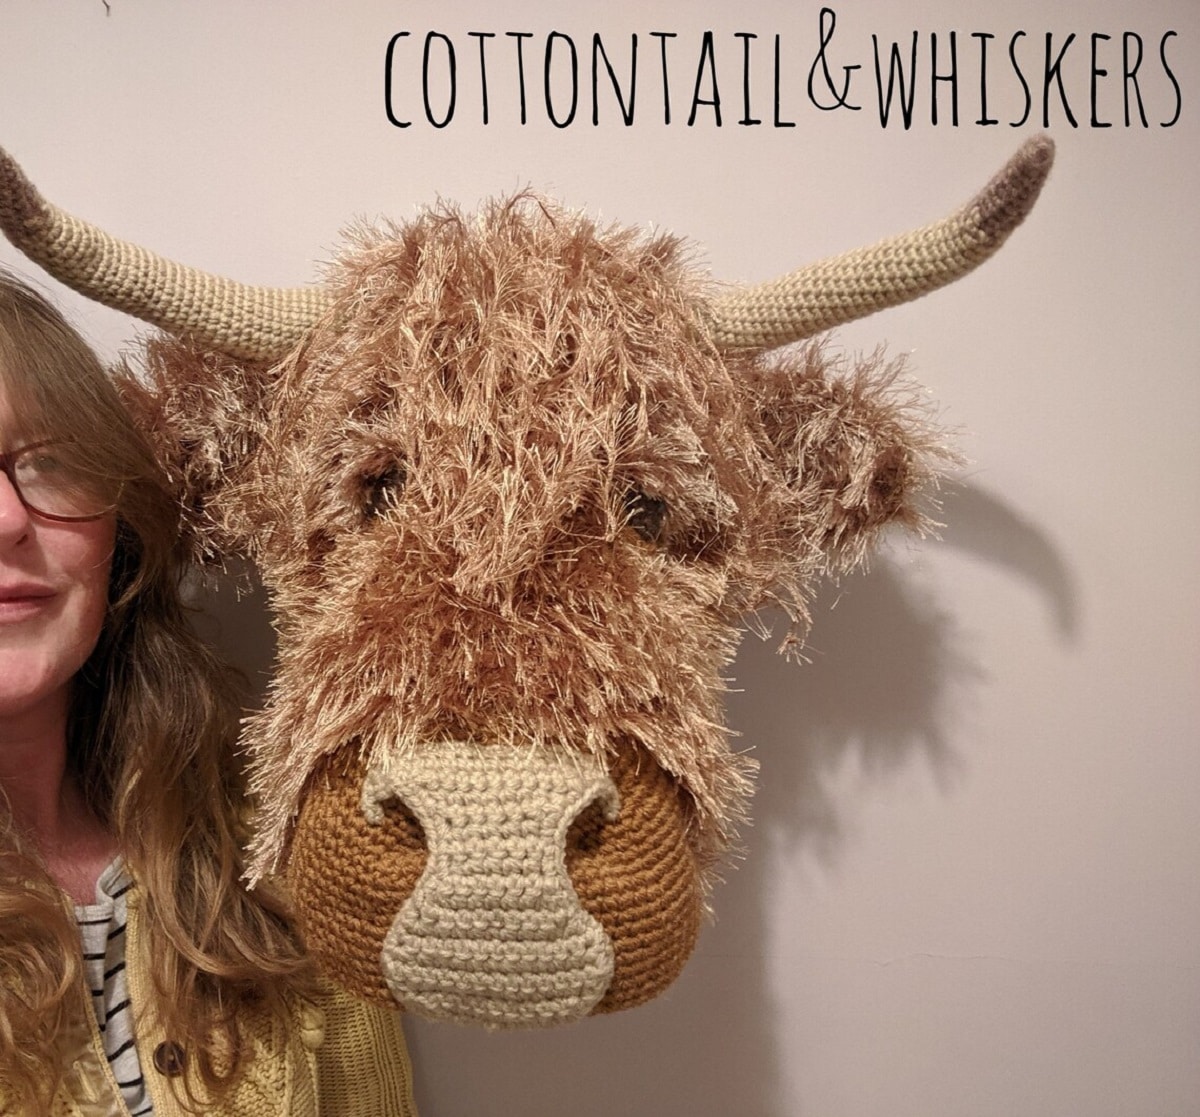 Woman with glasses standing next to a large crochet Highland Cow head mounted on a white wall.